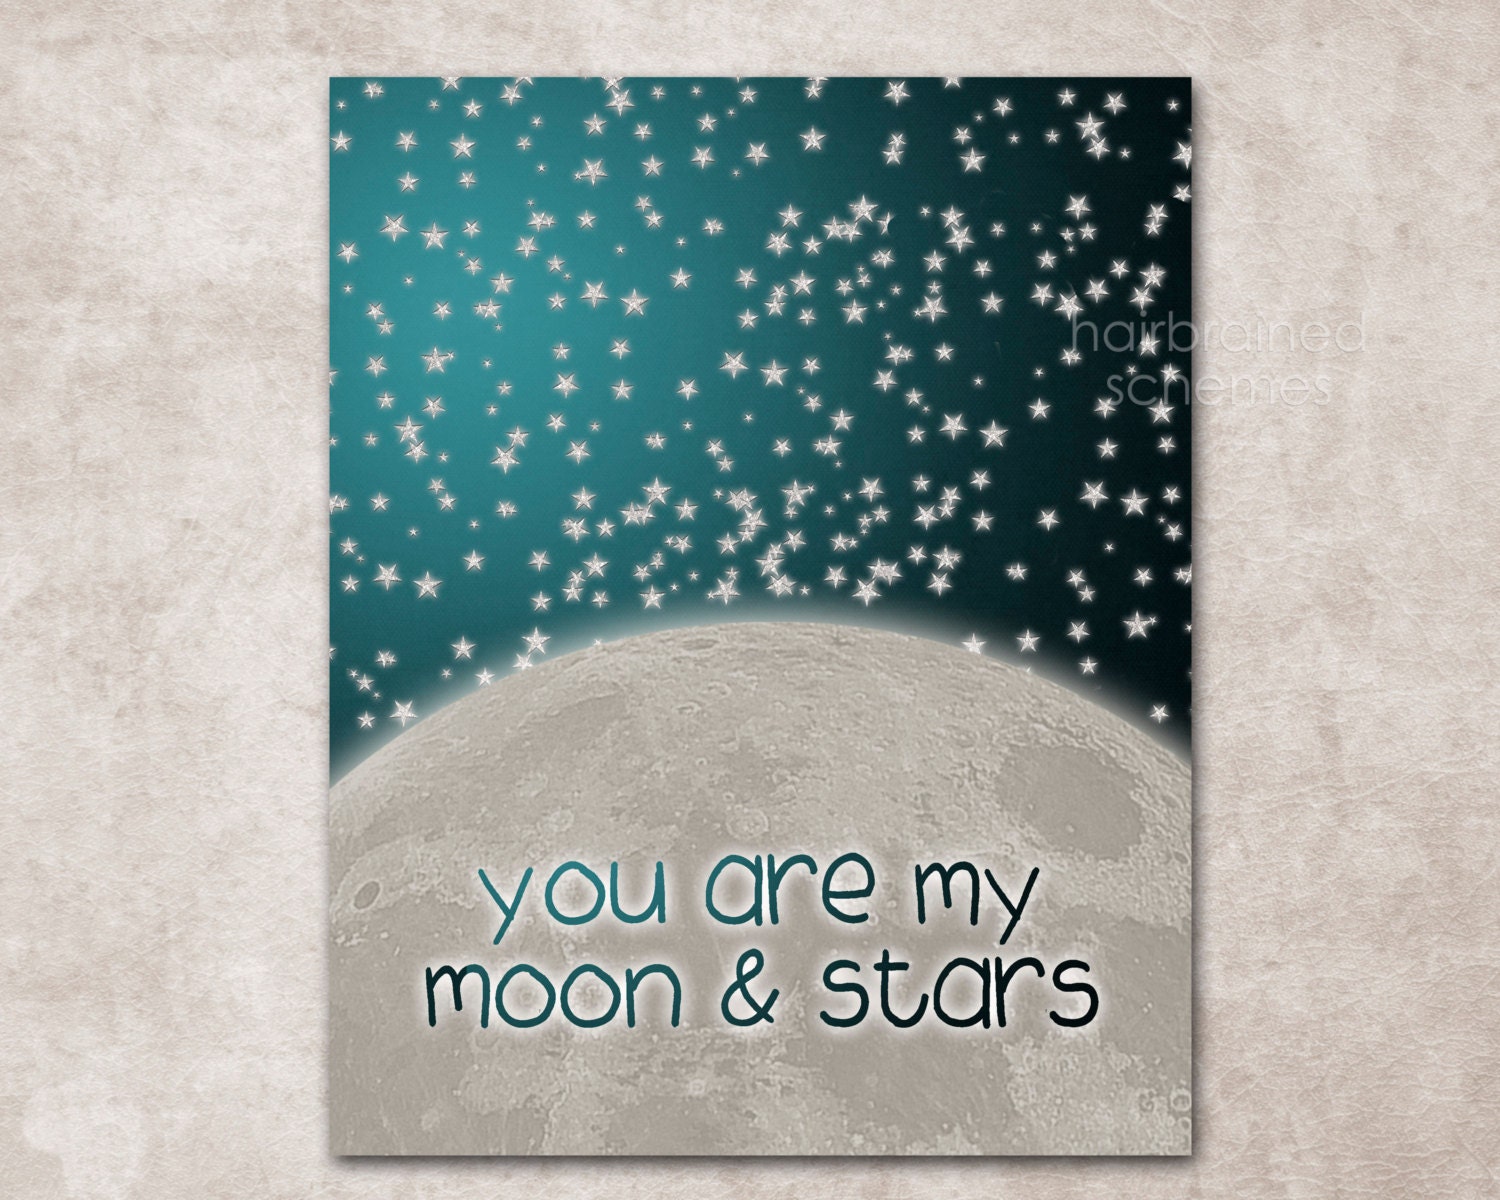 You are My Moon and Stars Digital Art Print - Starry Night Sky Starry Poster Print - hairbrainedschemes